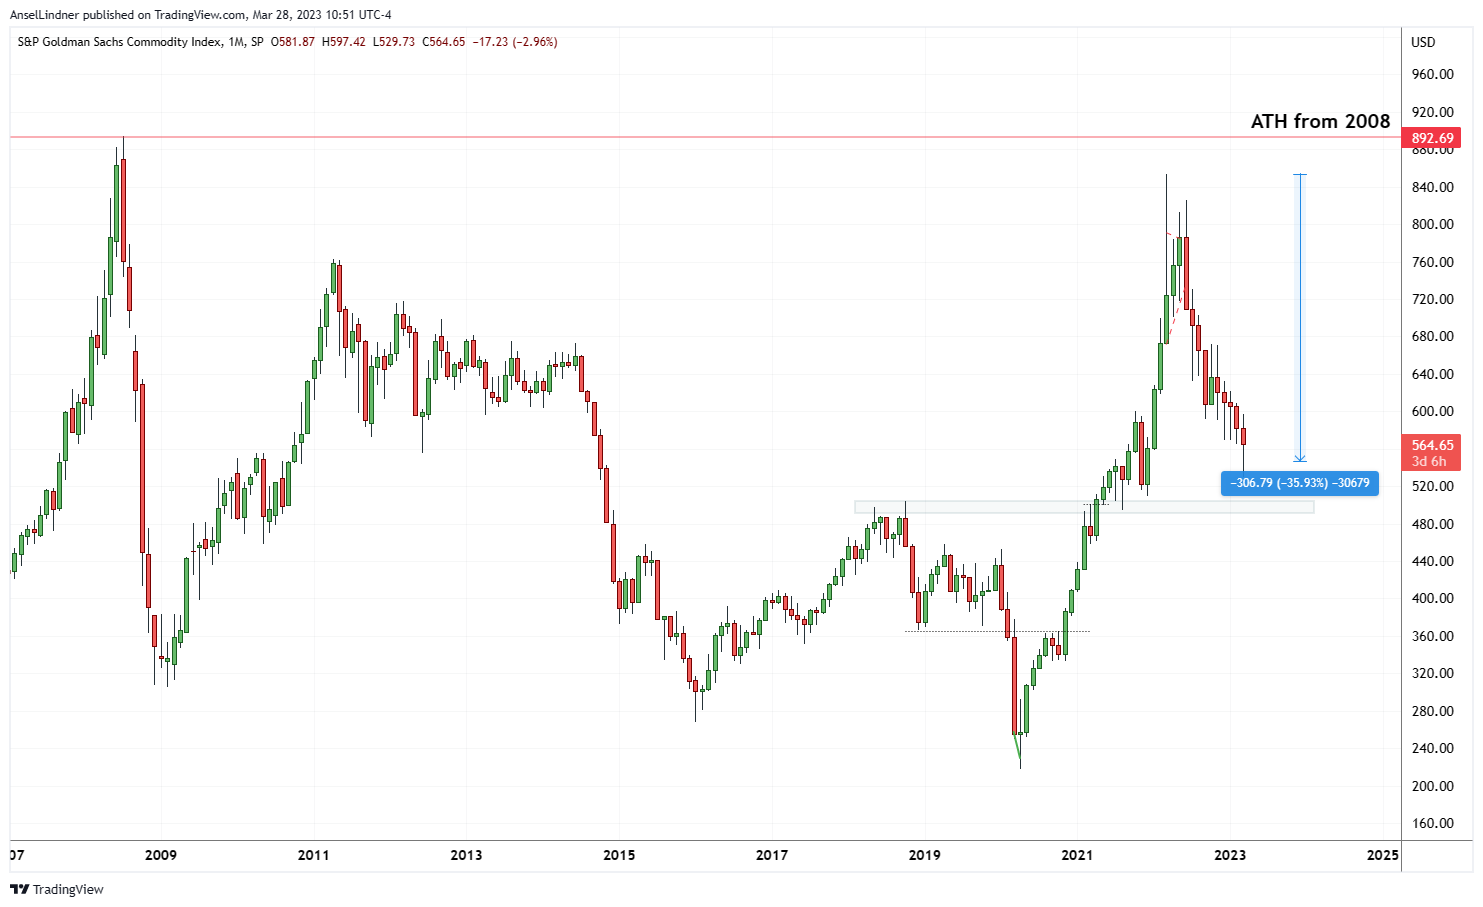 Commodity index didn't make new highs, down 35%, where's the inflation?